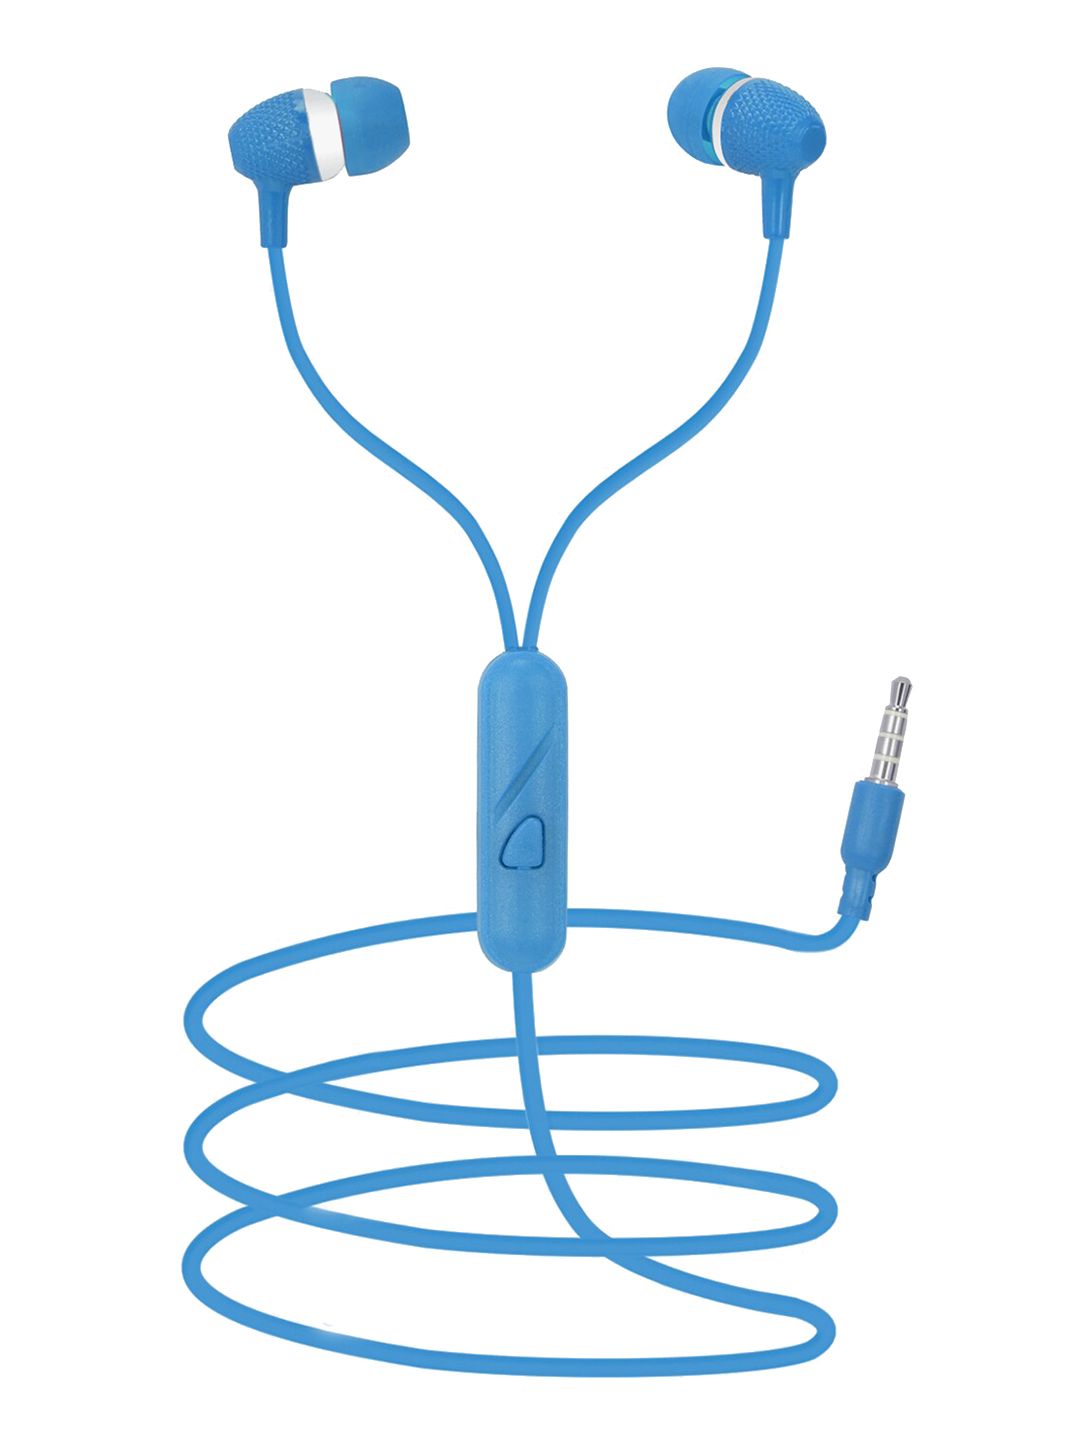 SWAGME Blue Boomdhoom IE009 In-Ear Wired Earphones With Mic Price in India